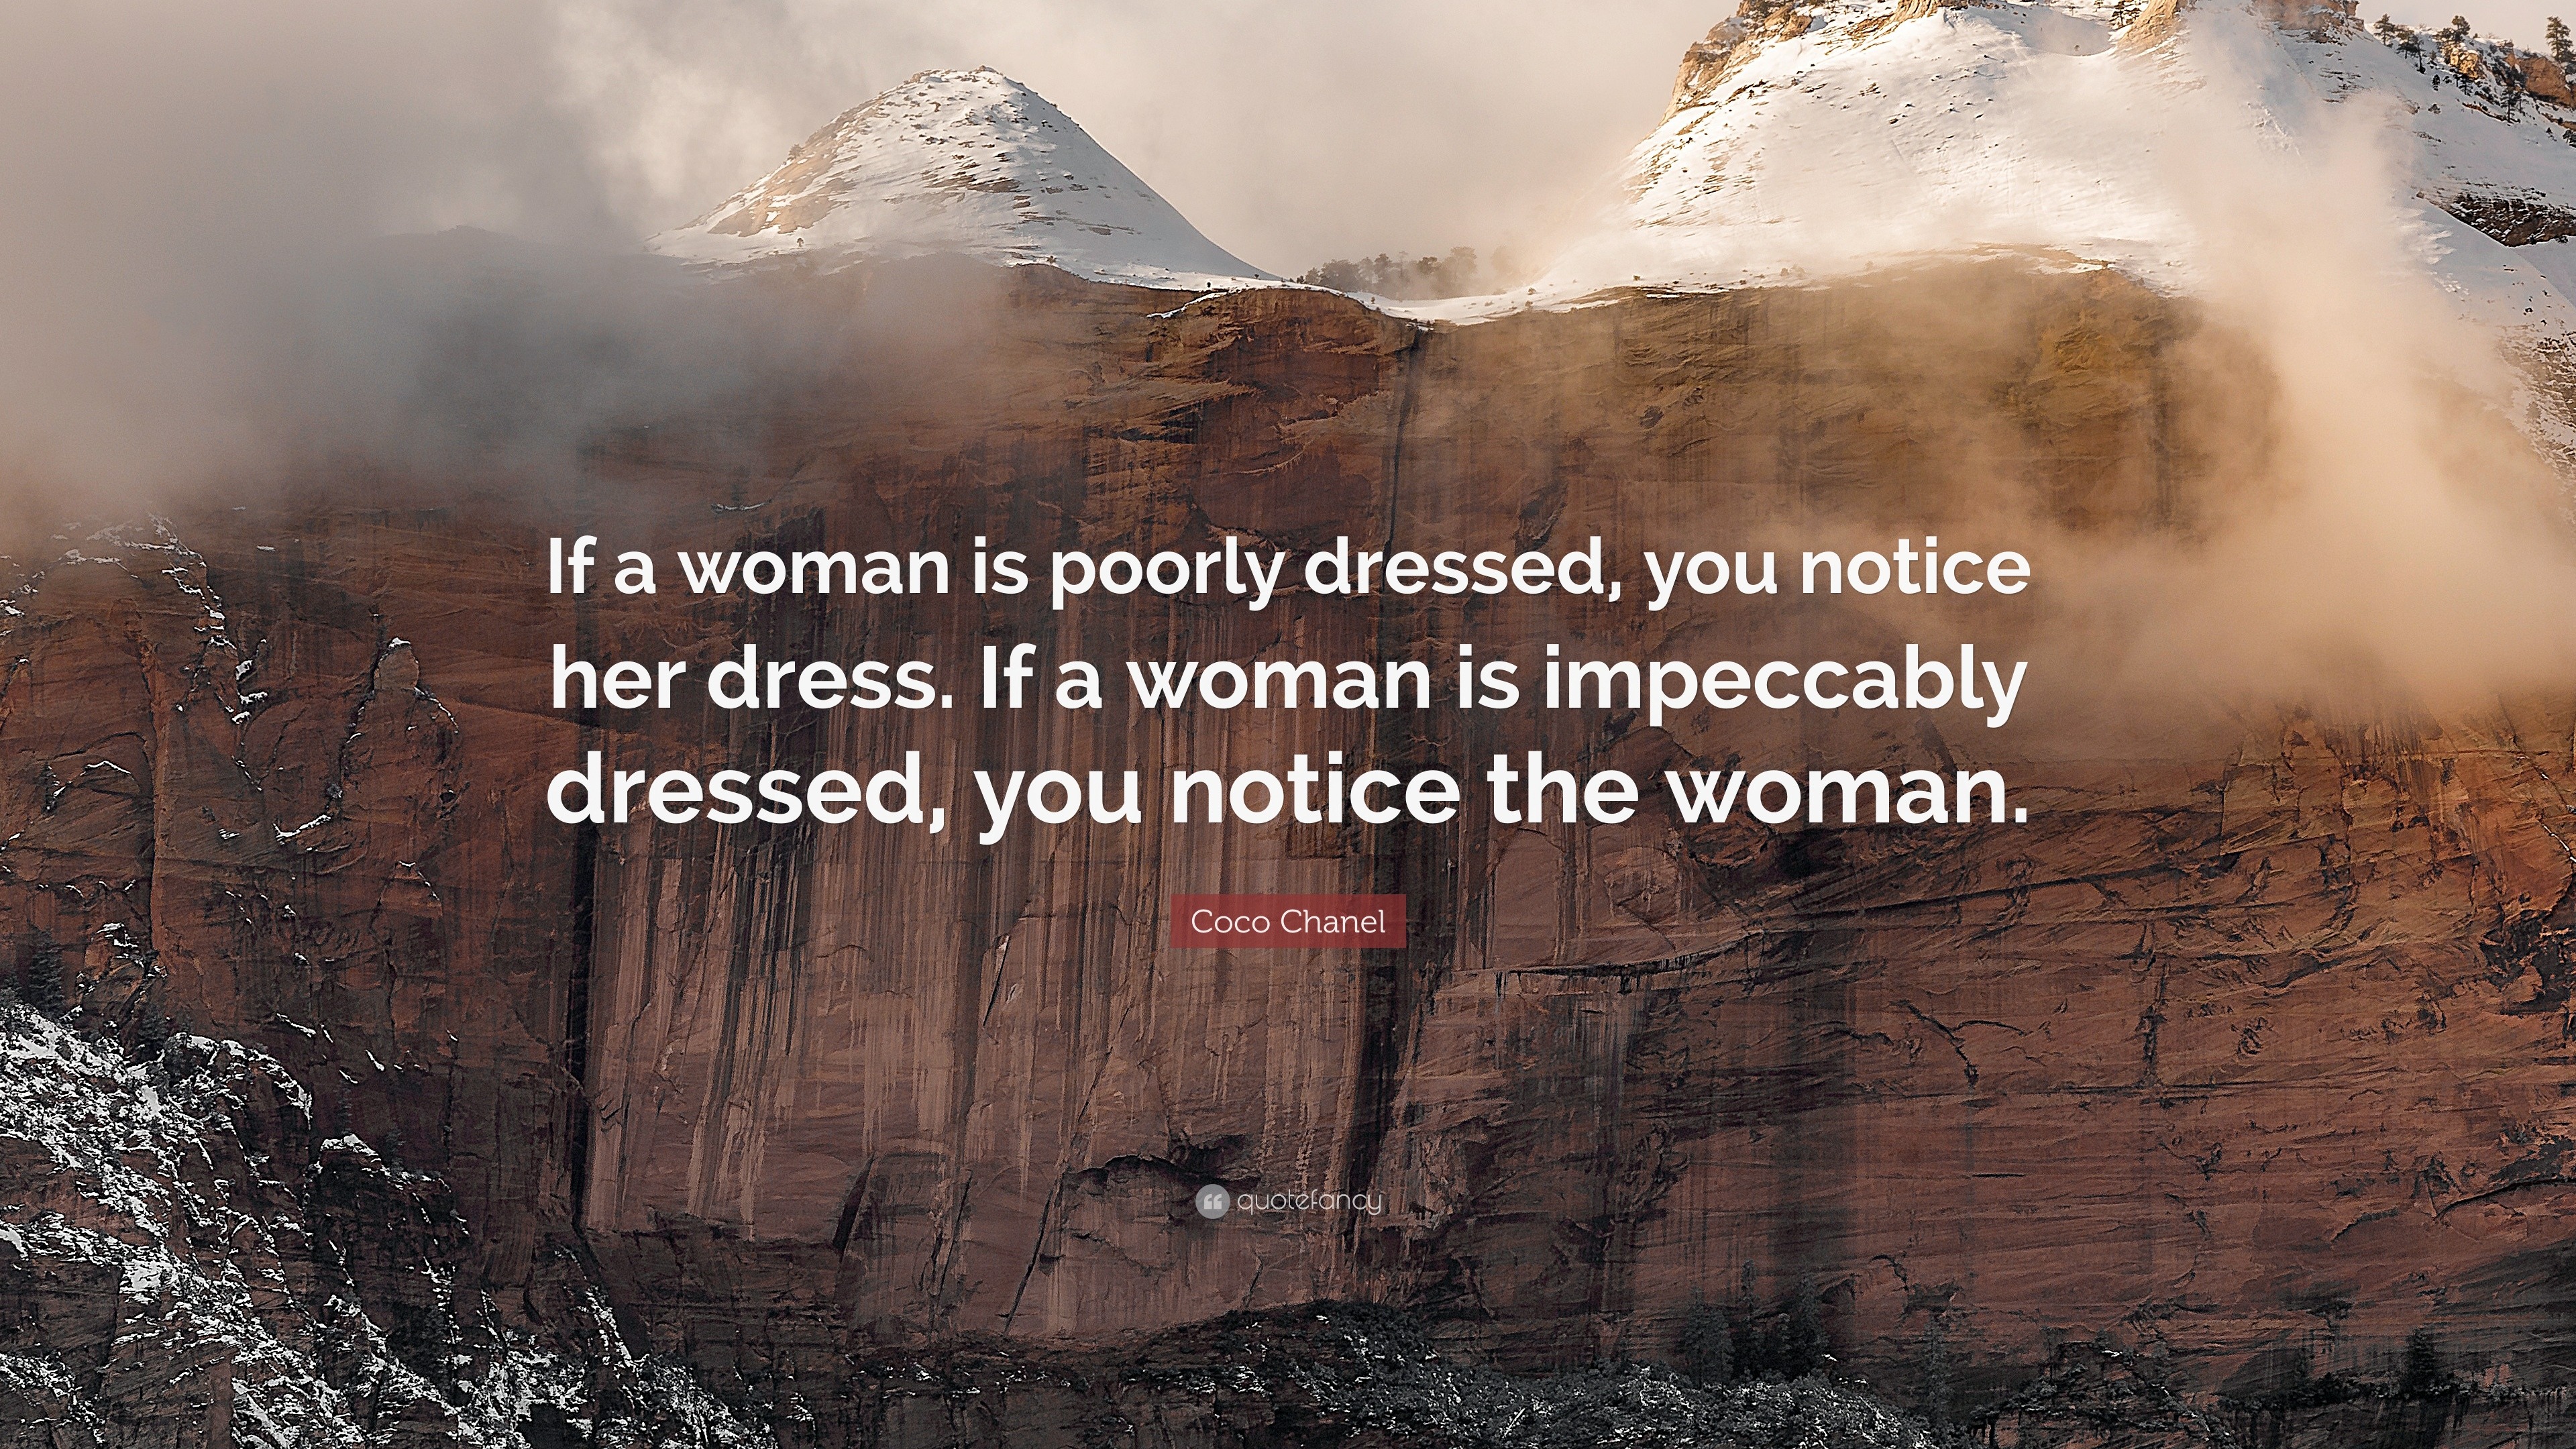 Coco Chanel Quote: “If a woman is poorly dressed, you notice her